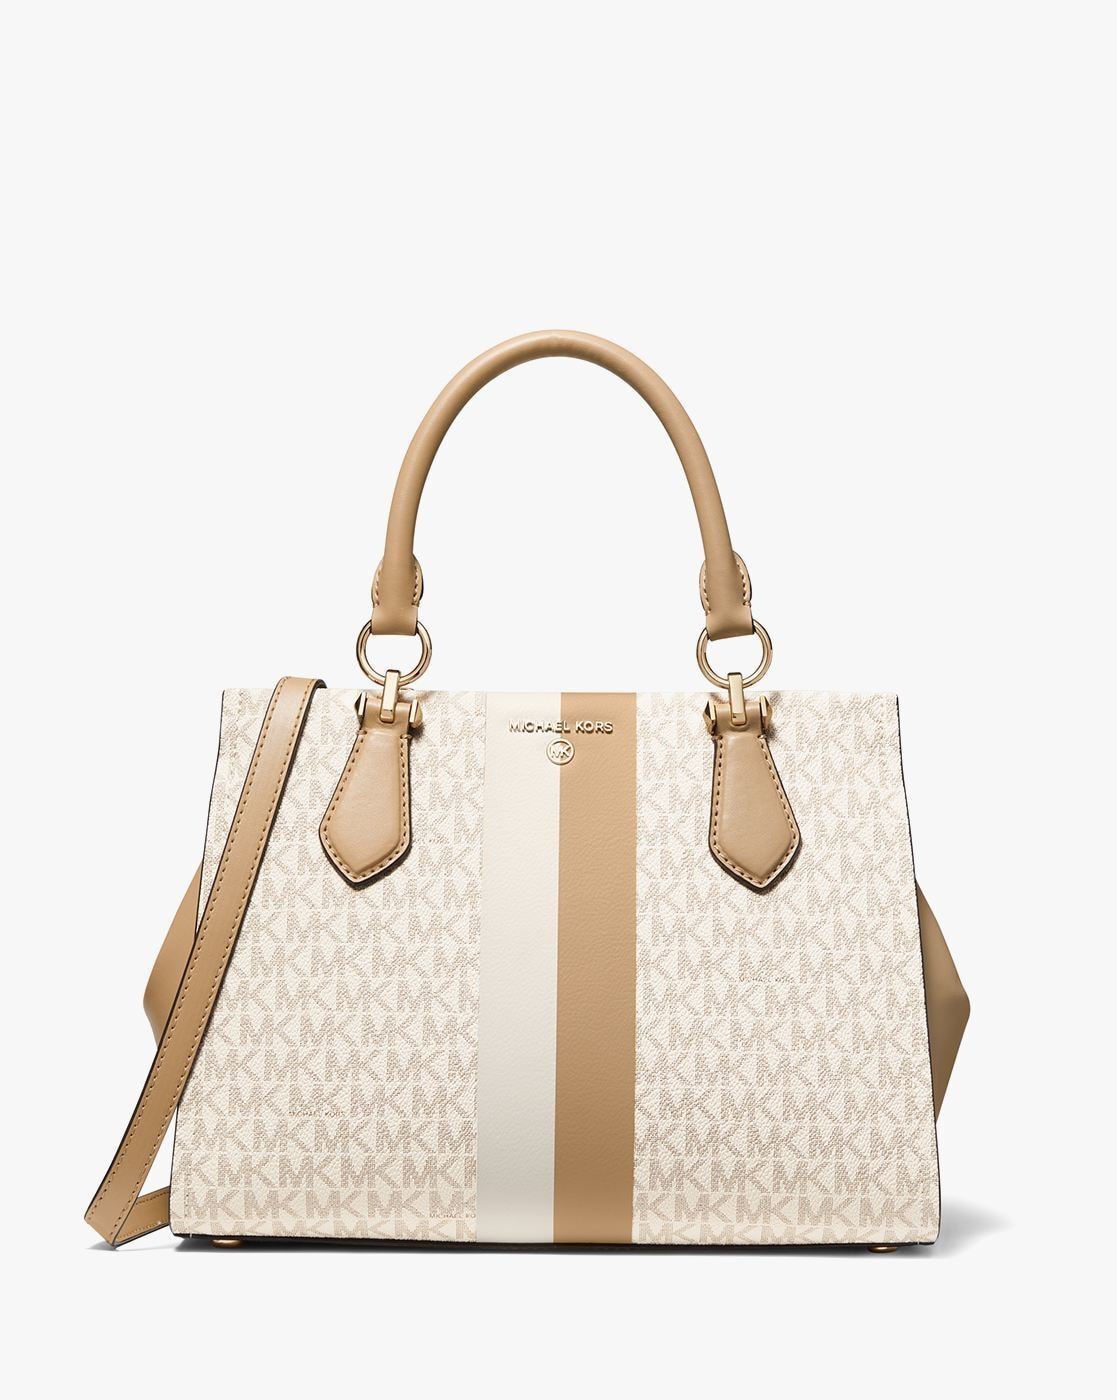 MICHAEL KORS Marilyn Medium Saffiano Leather Tote Bag for Sale in